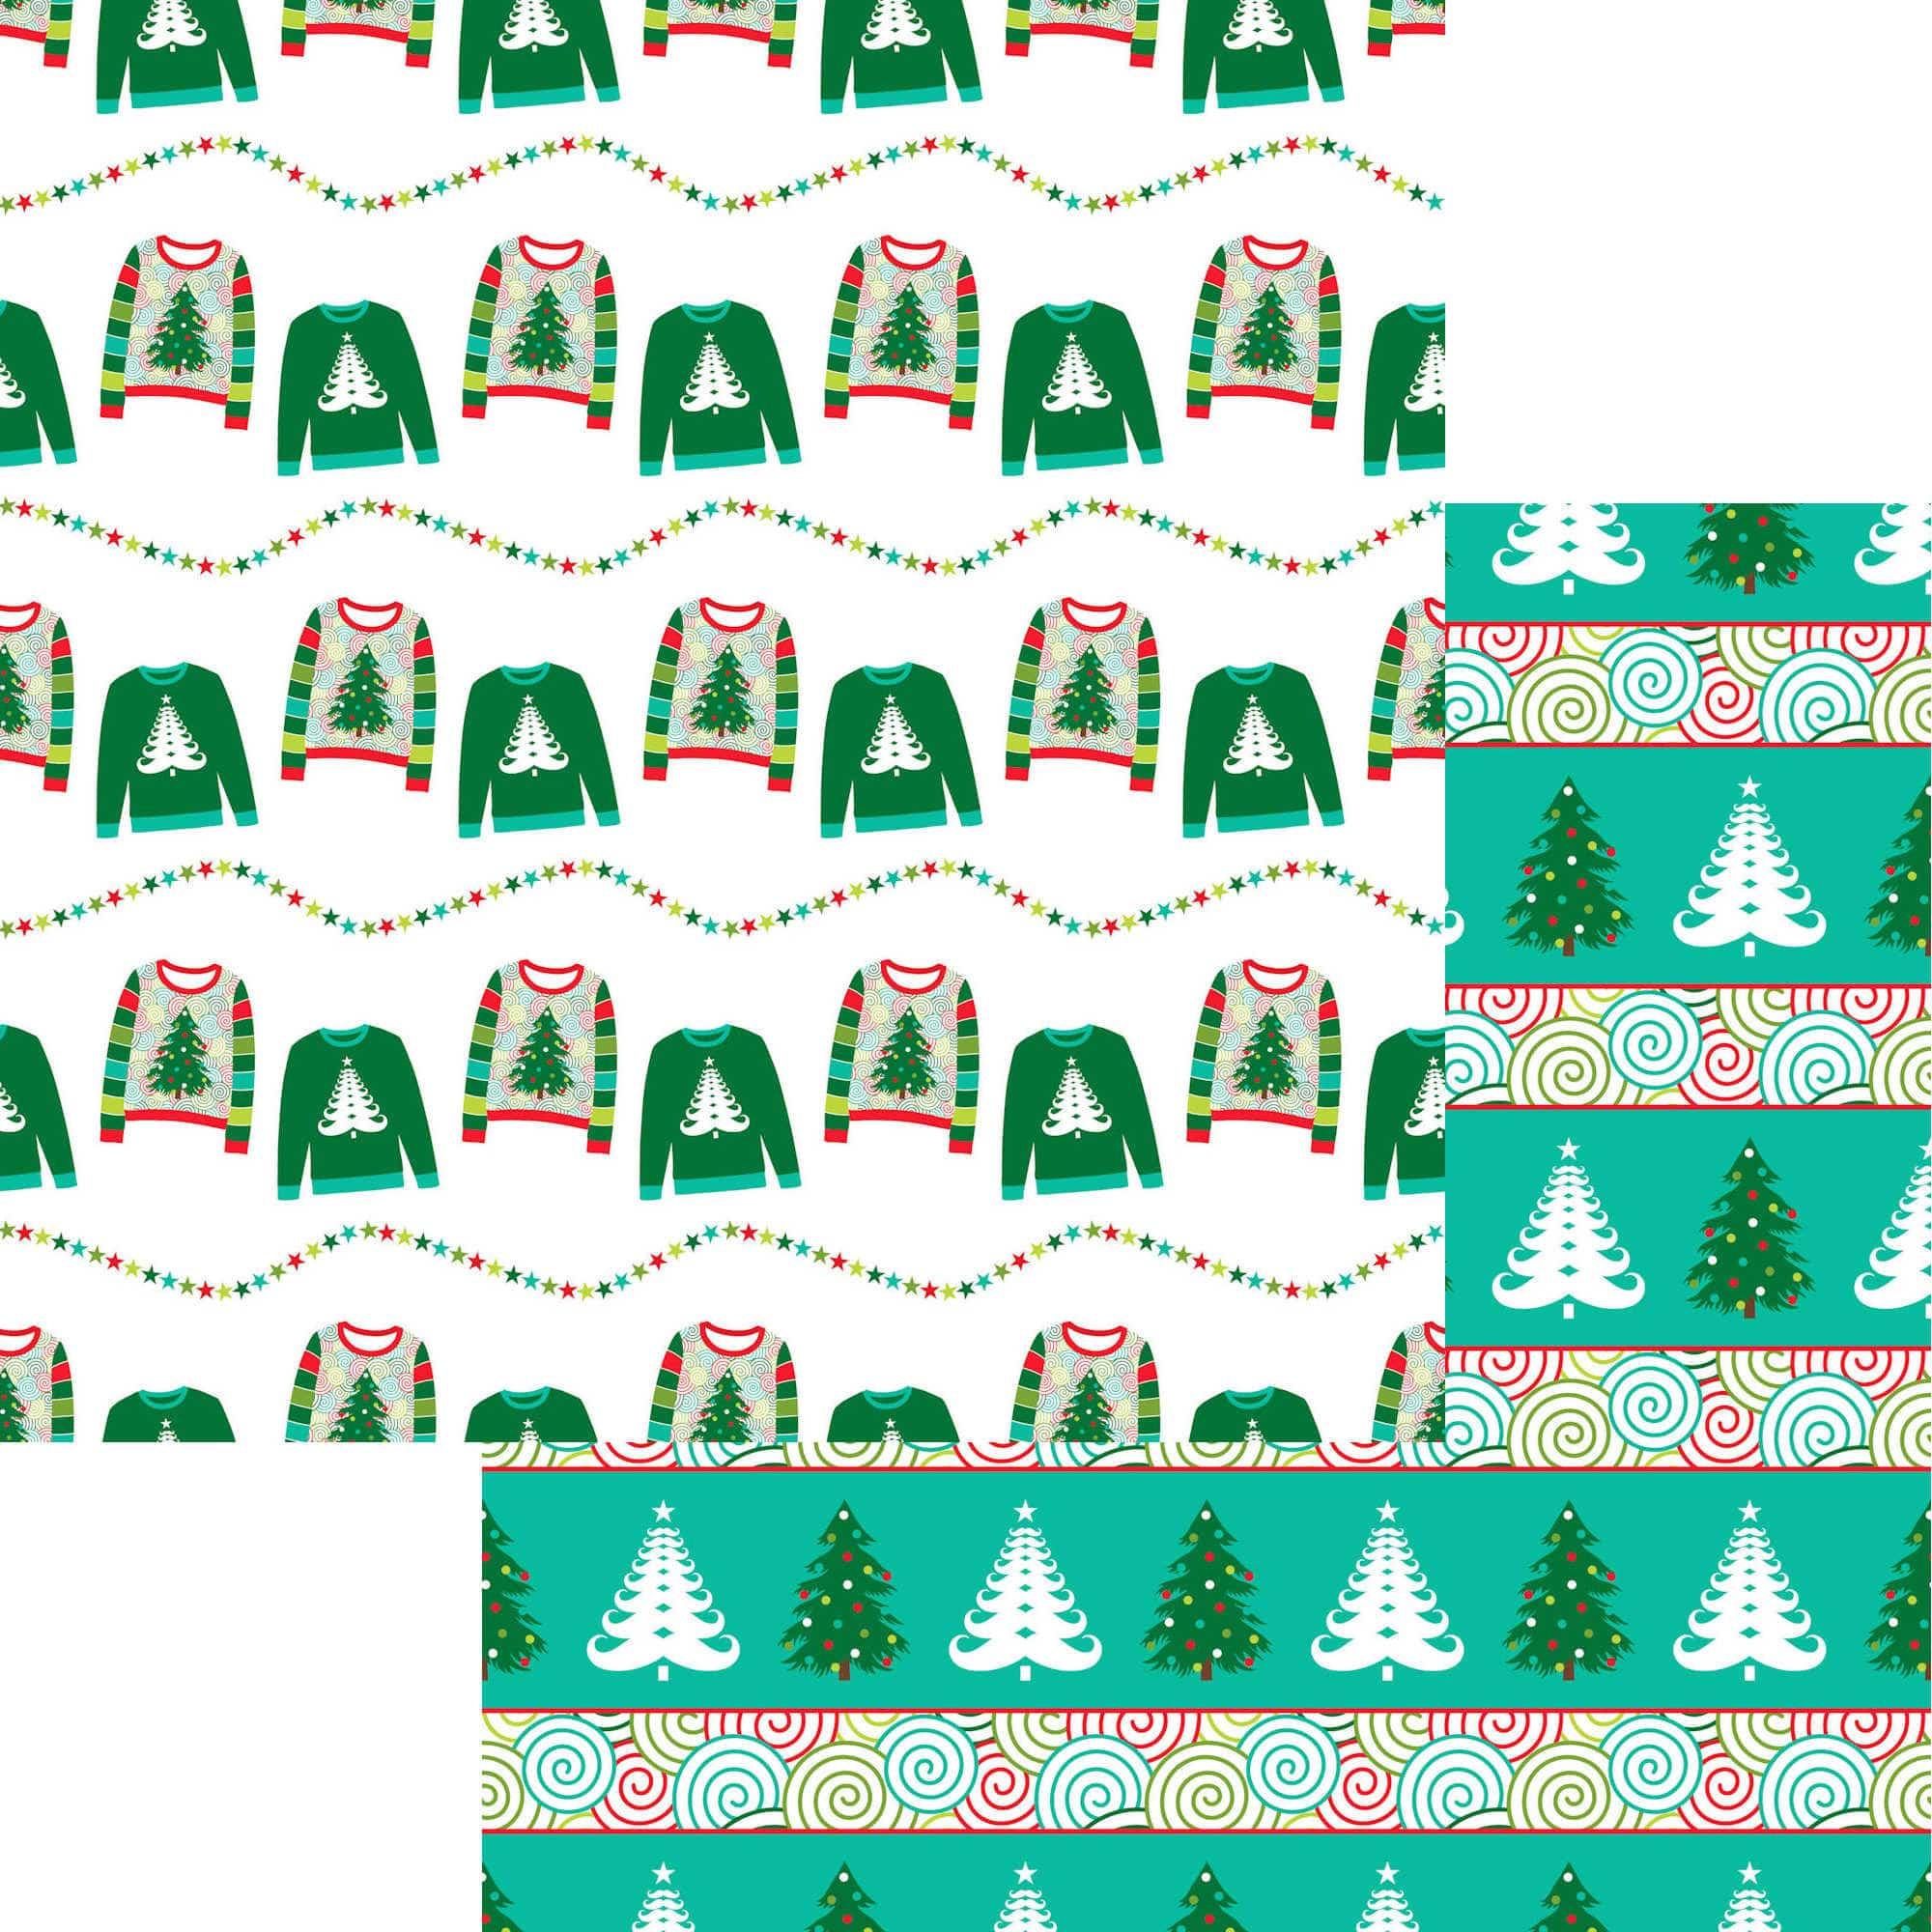 Ugly Christmas Sweater Collection O Christmas Tree 12 x 12 Double-Sided Scrapbook Paper by SSC Designs - Scrapbook Supply Companies